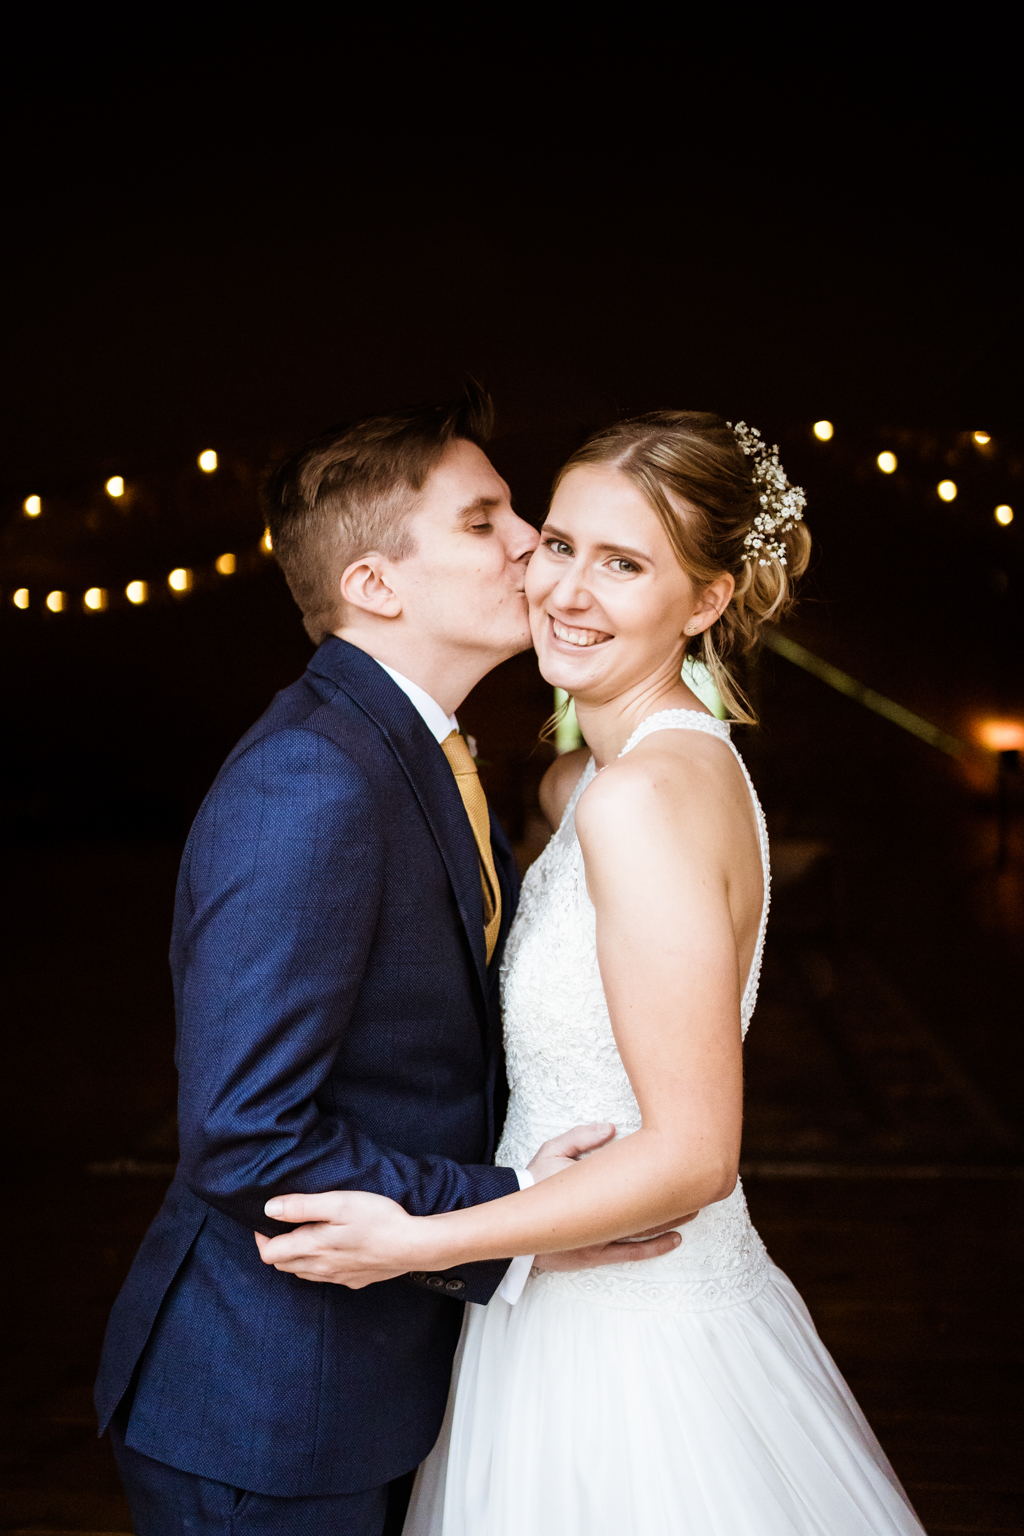 Sophie and Christopher's joyful, festive 2020 wedding at Jimmy's Farm, with Him & Her Wedding Photography (9)